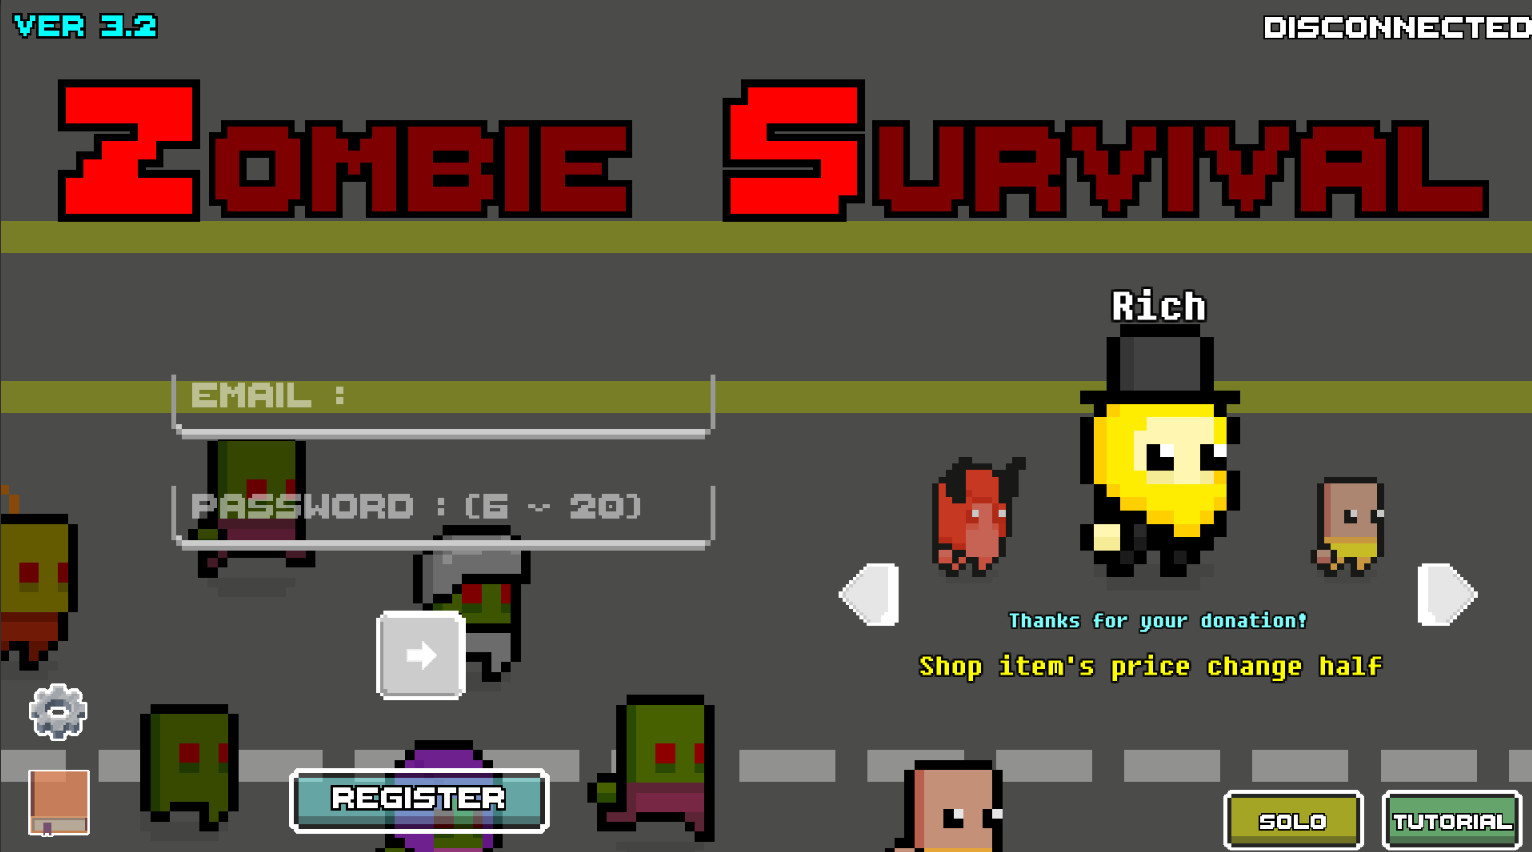 Zombie Survival online - Add Charactor - Rich (Donate for Developer) Featured Screenshot #1